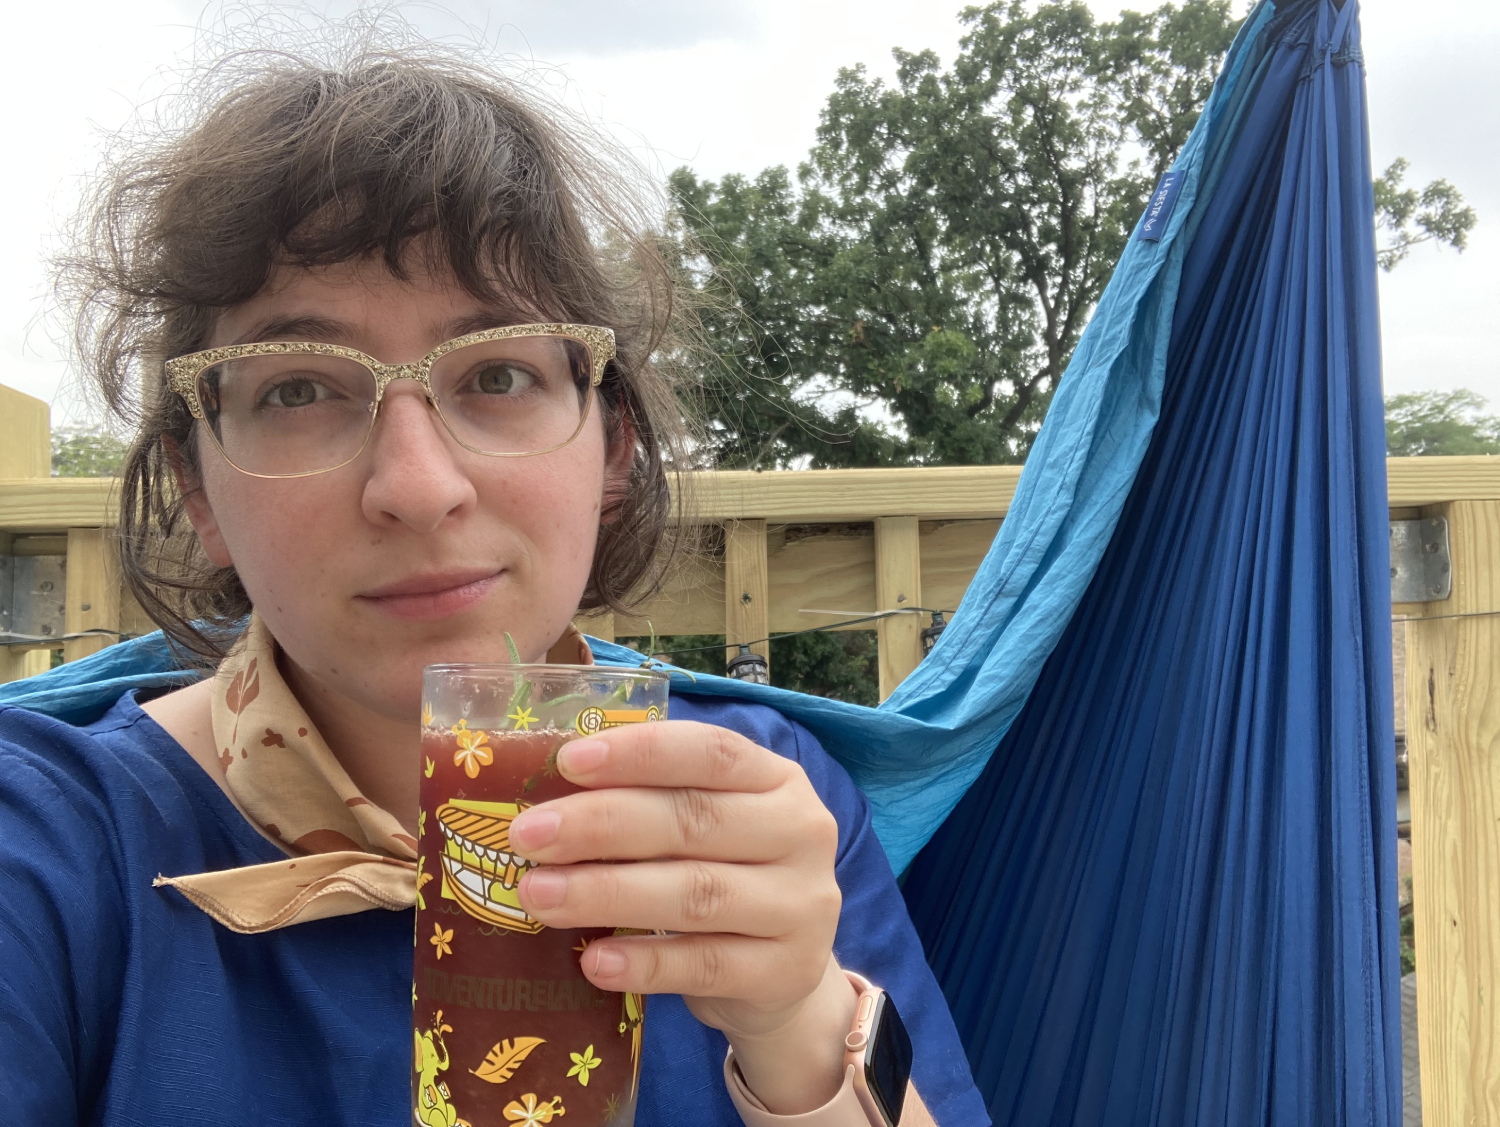 Camp Director Summer wearing a blue shirt and yellow bandana, sitting on her porch enjoying her pom cocktail